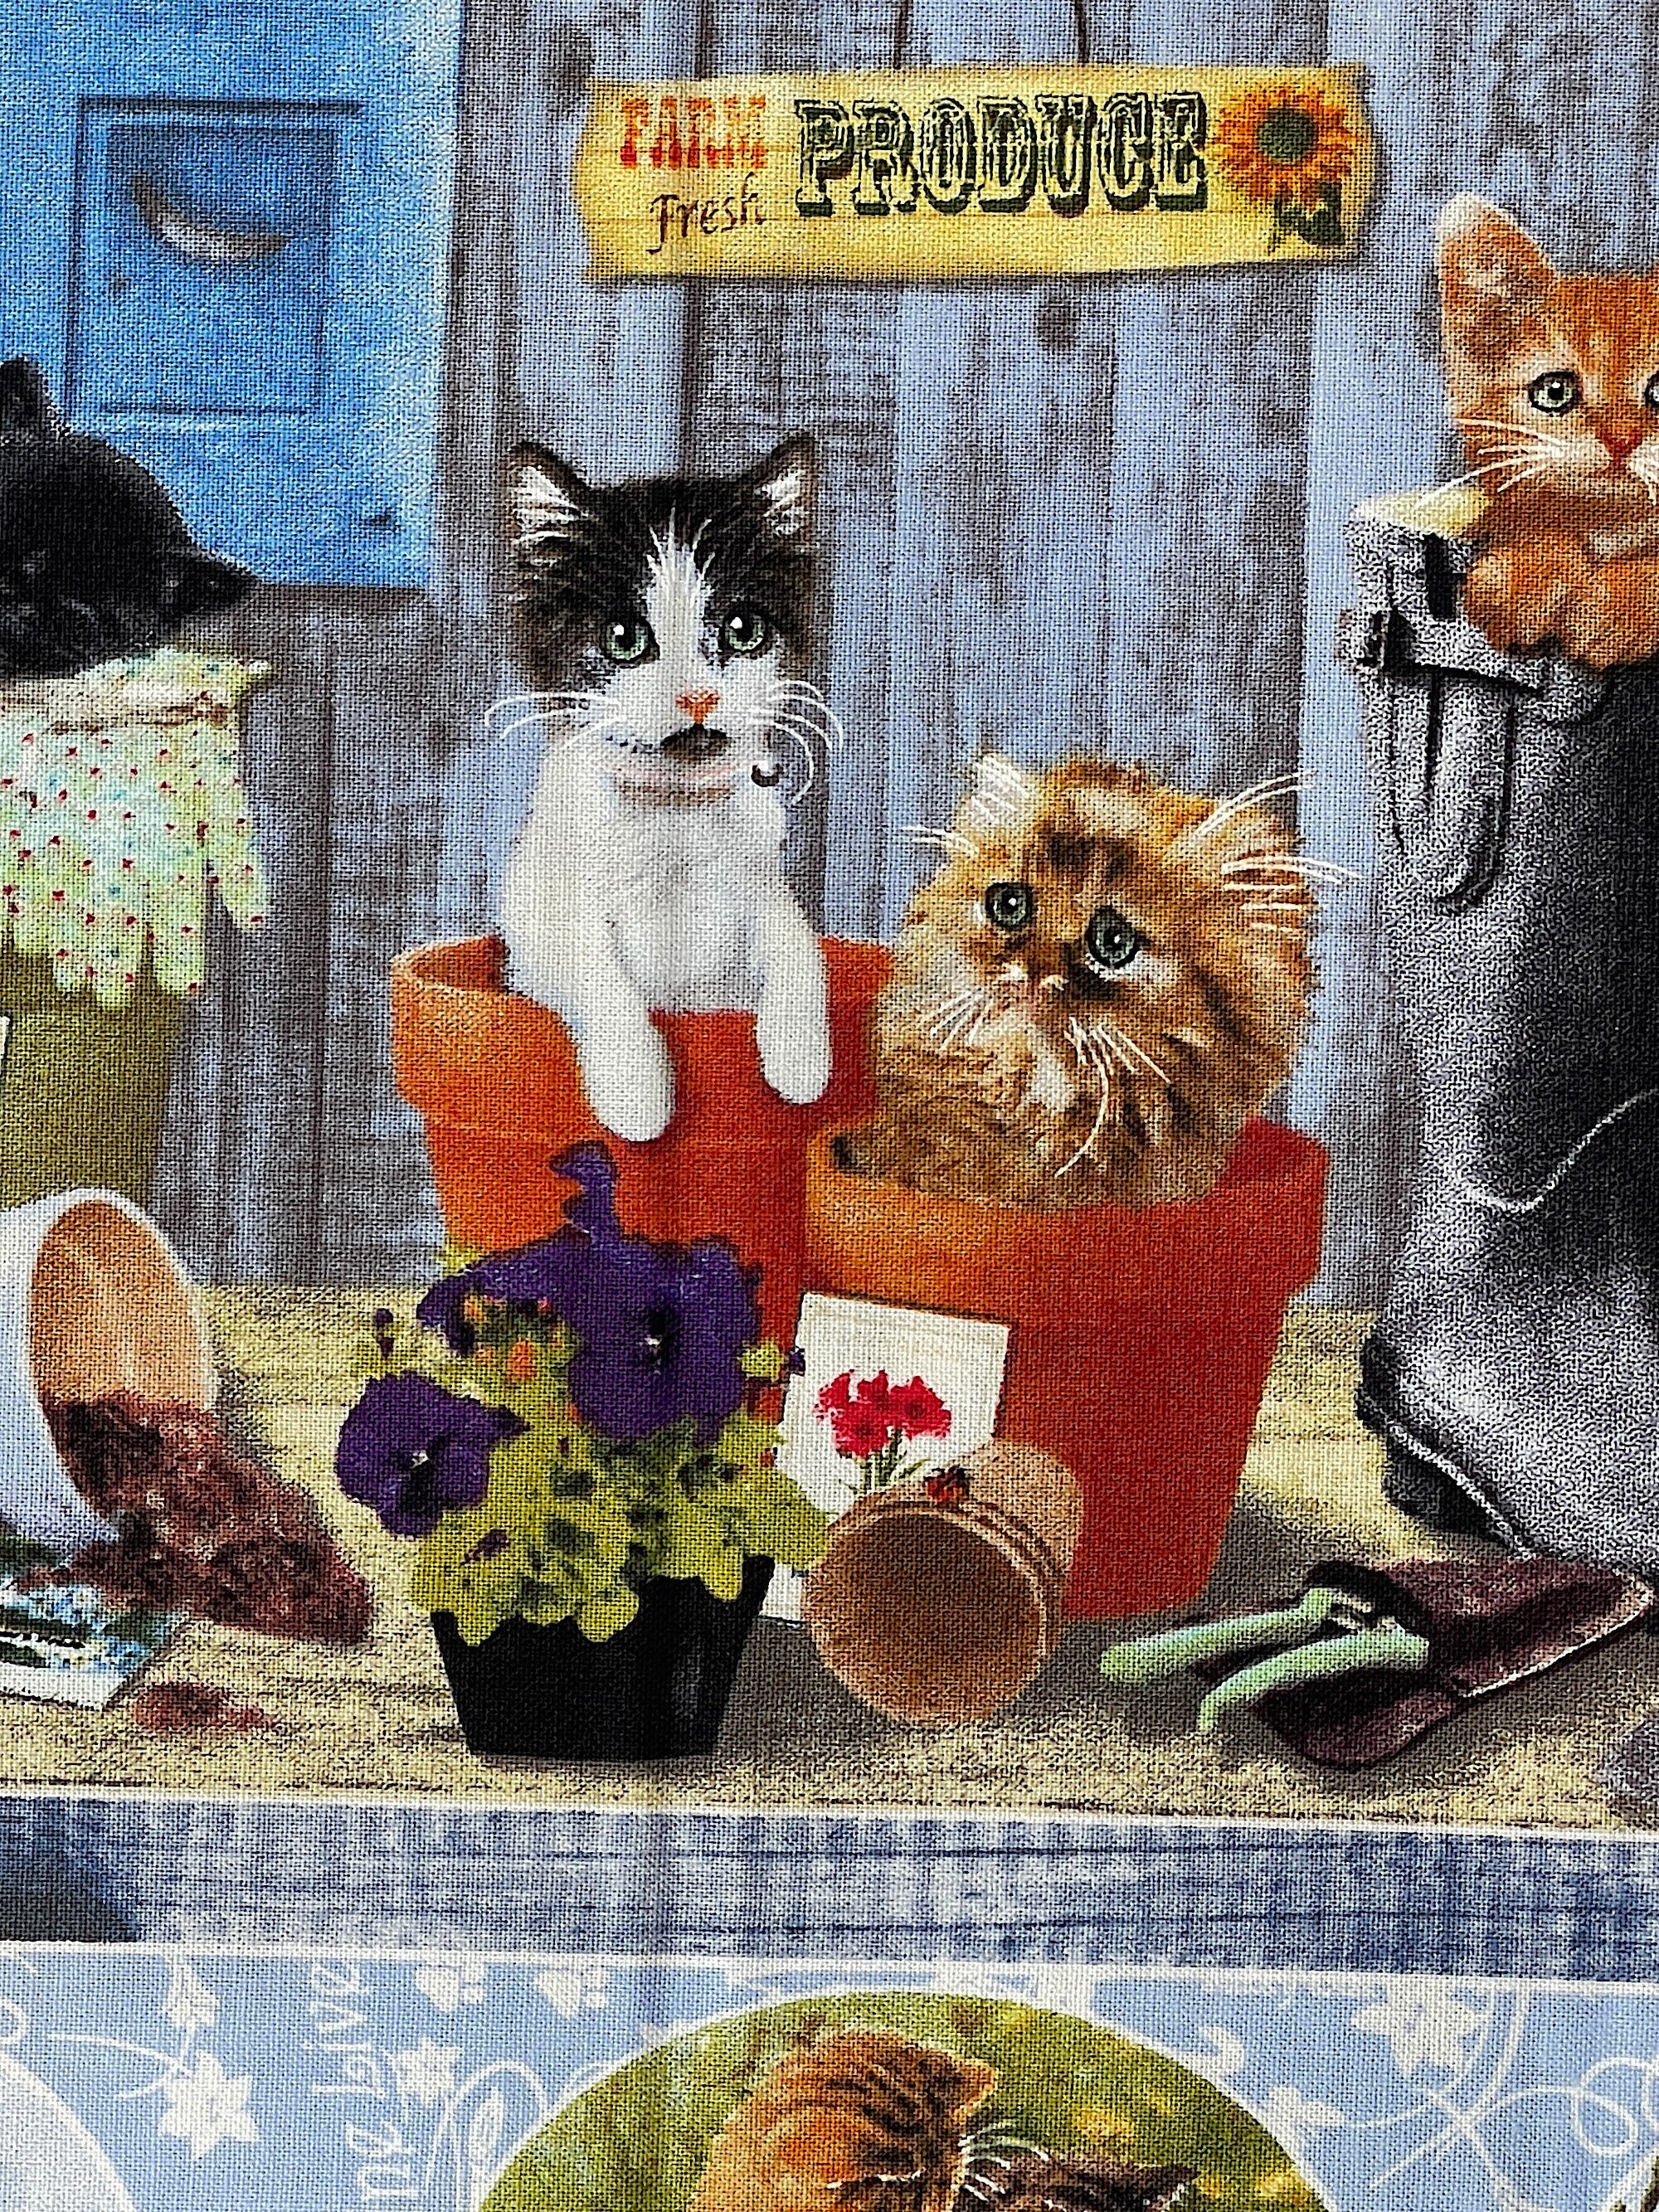 Close up of cats in pots, pansies and more.